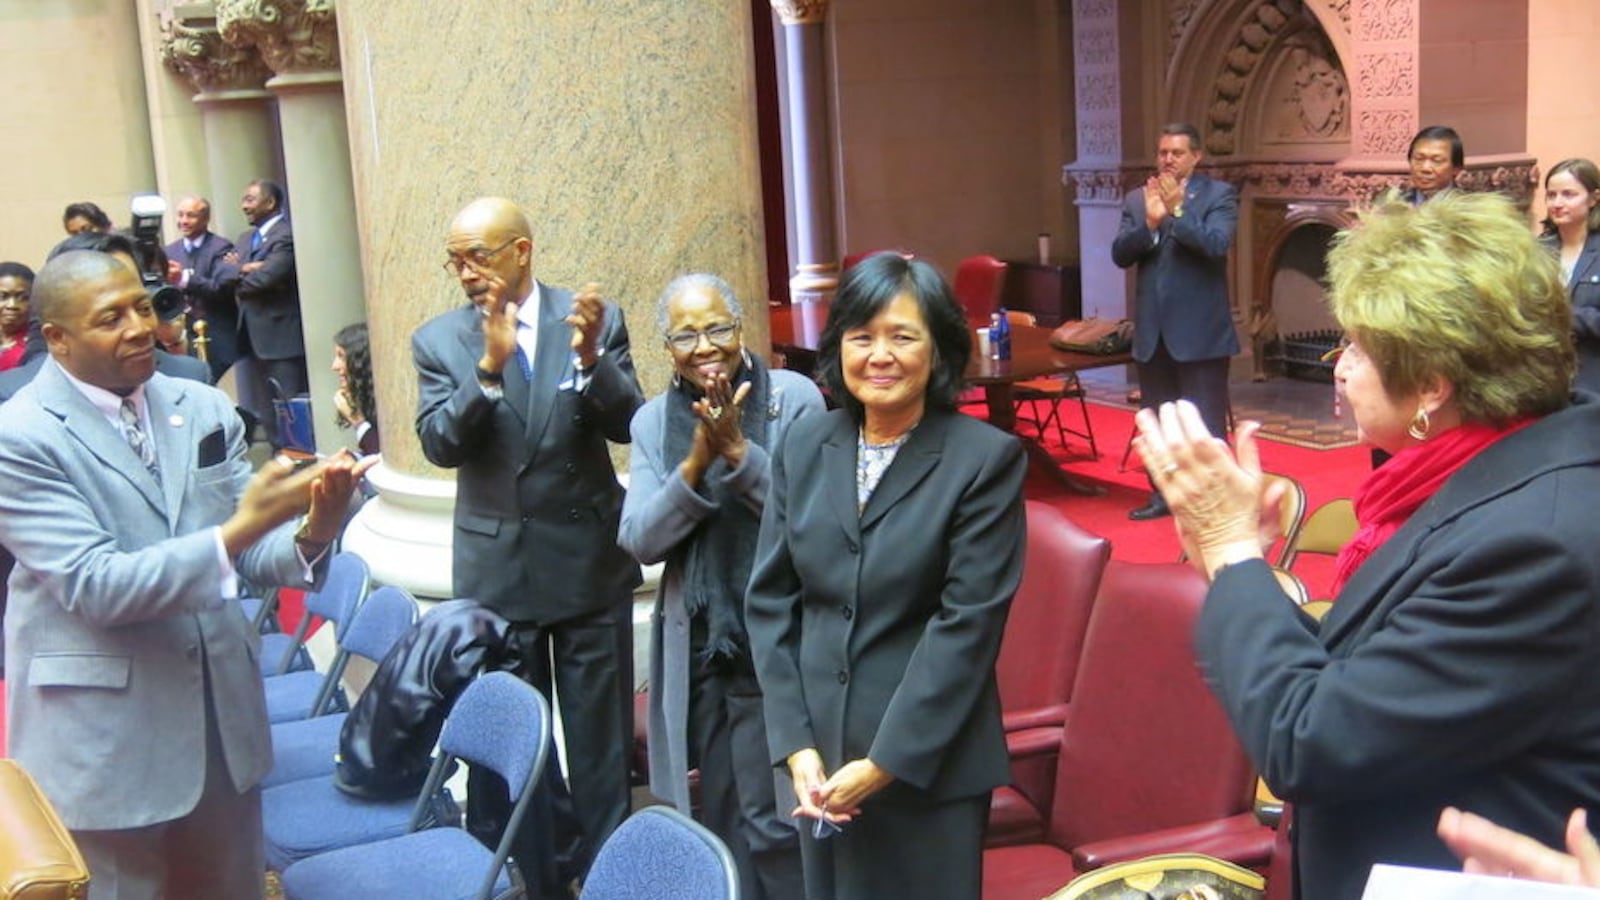 Judith Chin, a new member of the Board of Regents, after being appointed by the state legislature.